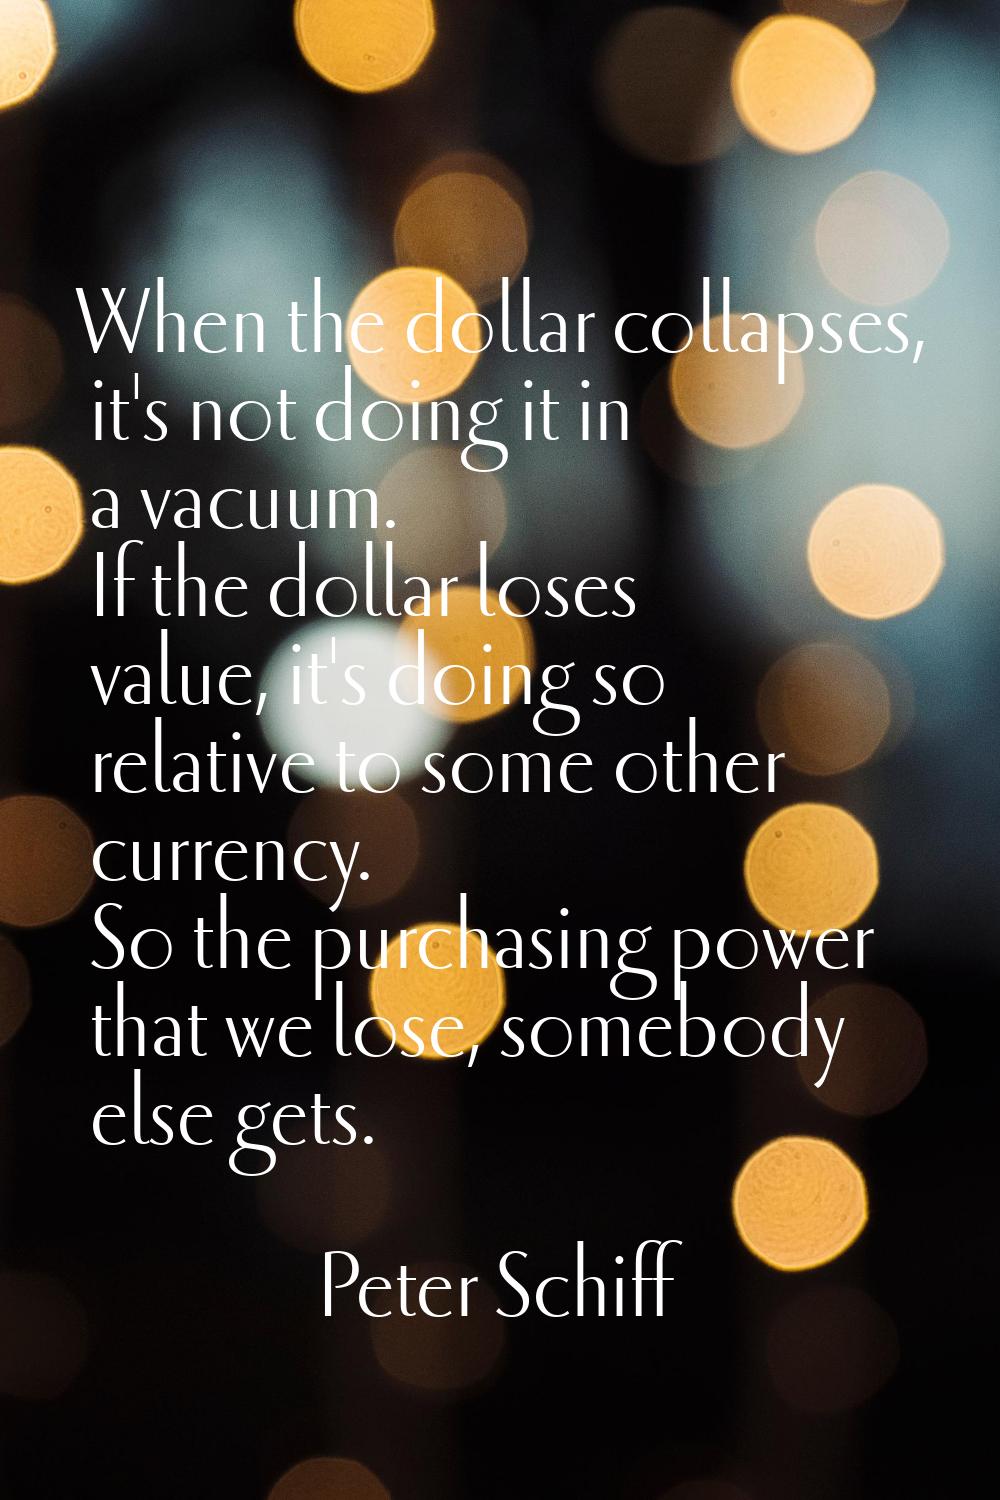 When the dollar collapses, it's not doing it in a vacuum. If the dollar loses value, it's doing so 